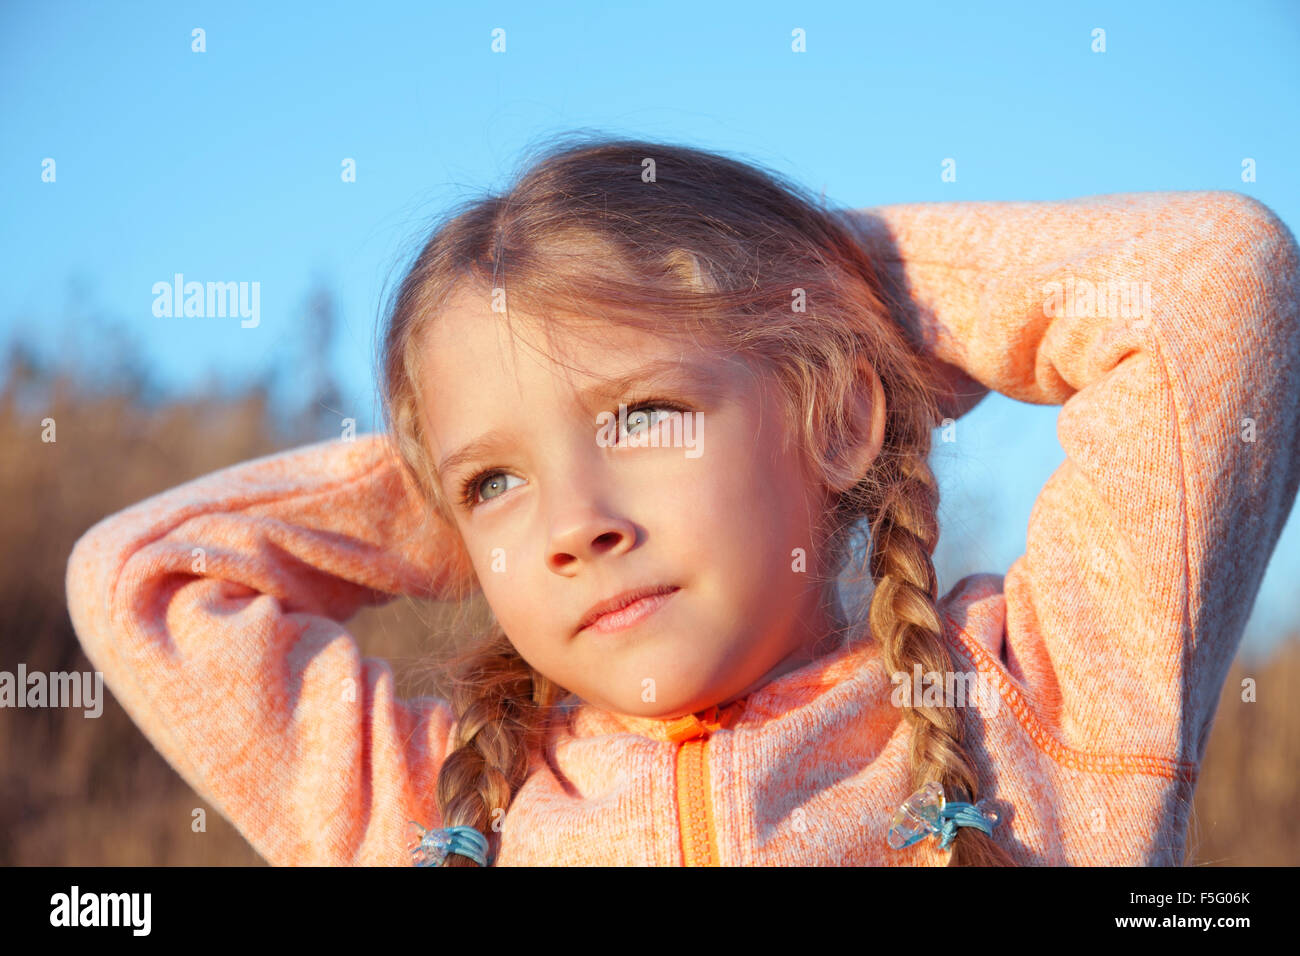 Portrait of a girl with pigtails closeup outdoors Stock Photo